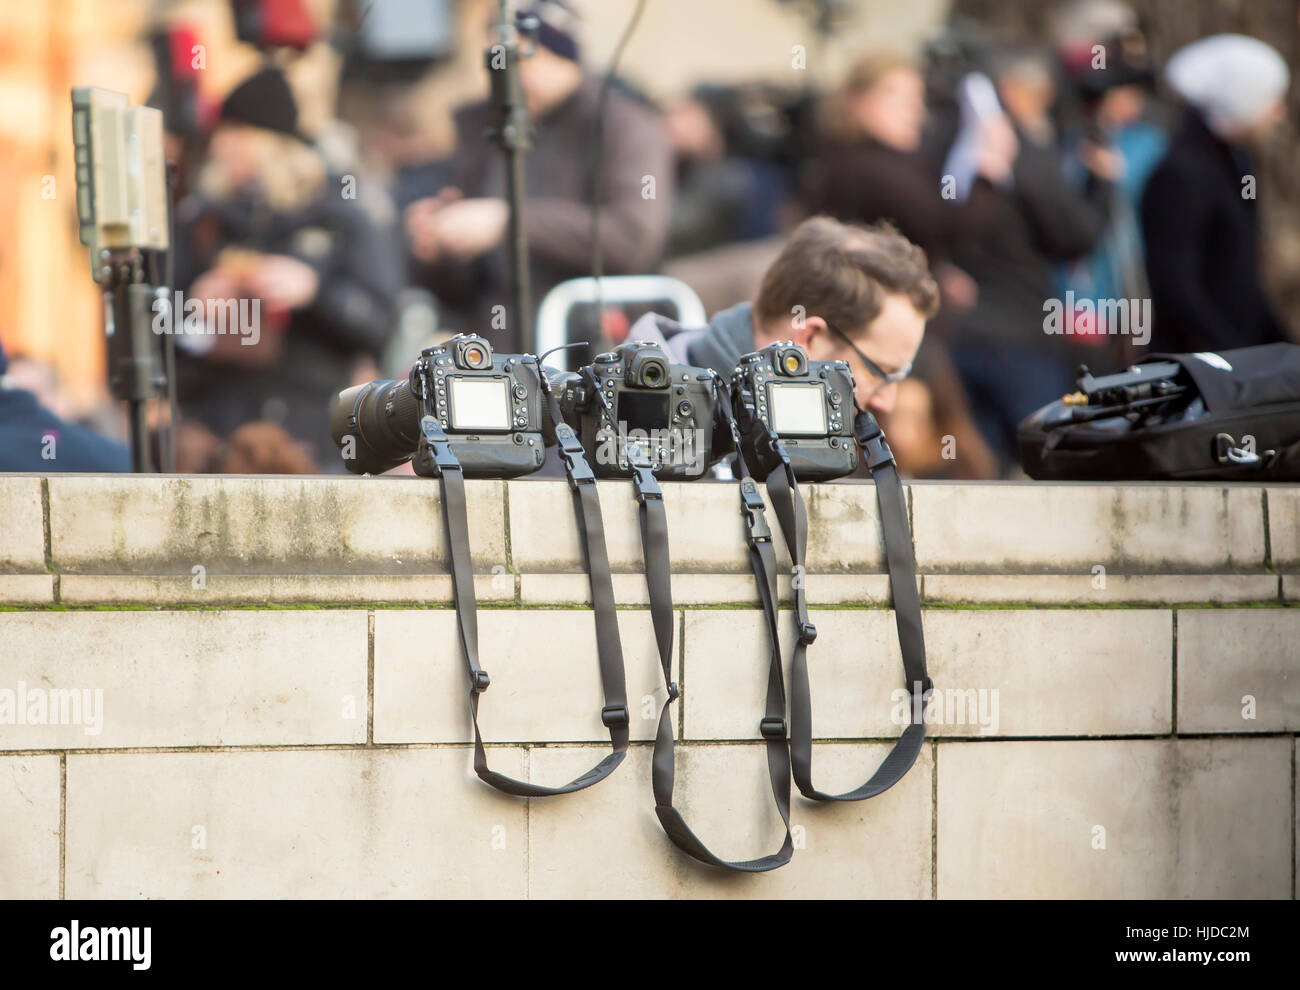 London, UK. 24th Jan, 2017. Verdict of the Supreme Court. The verdict of the Supreme Court was given today. The press were present in their numbers waiting for the verdict. Credit: Jane Campbell/Alamy Live News Stock Photo